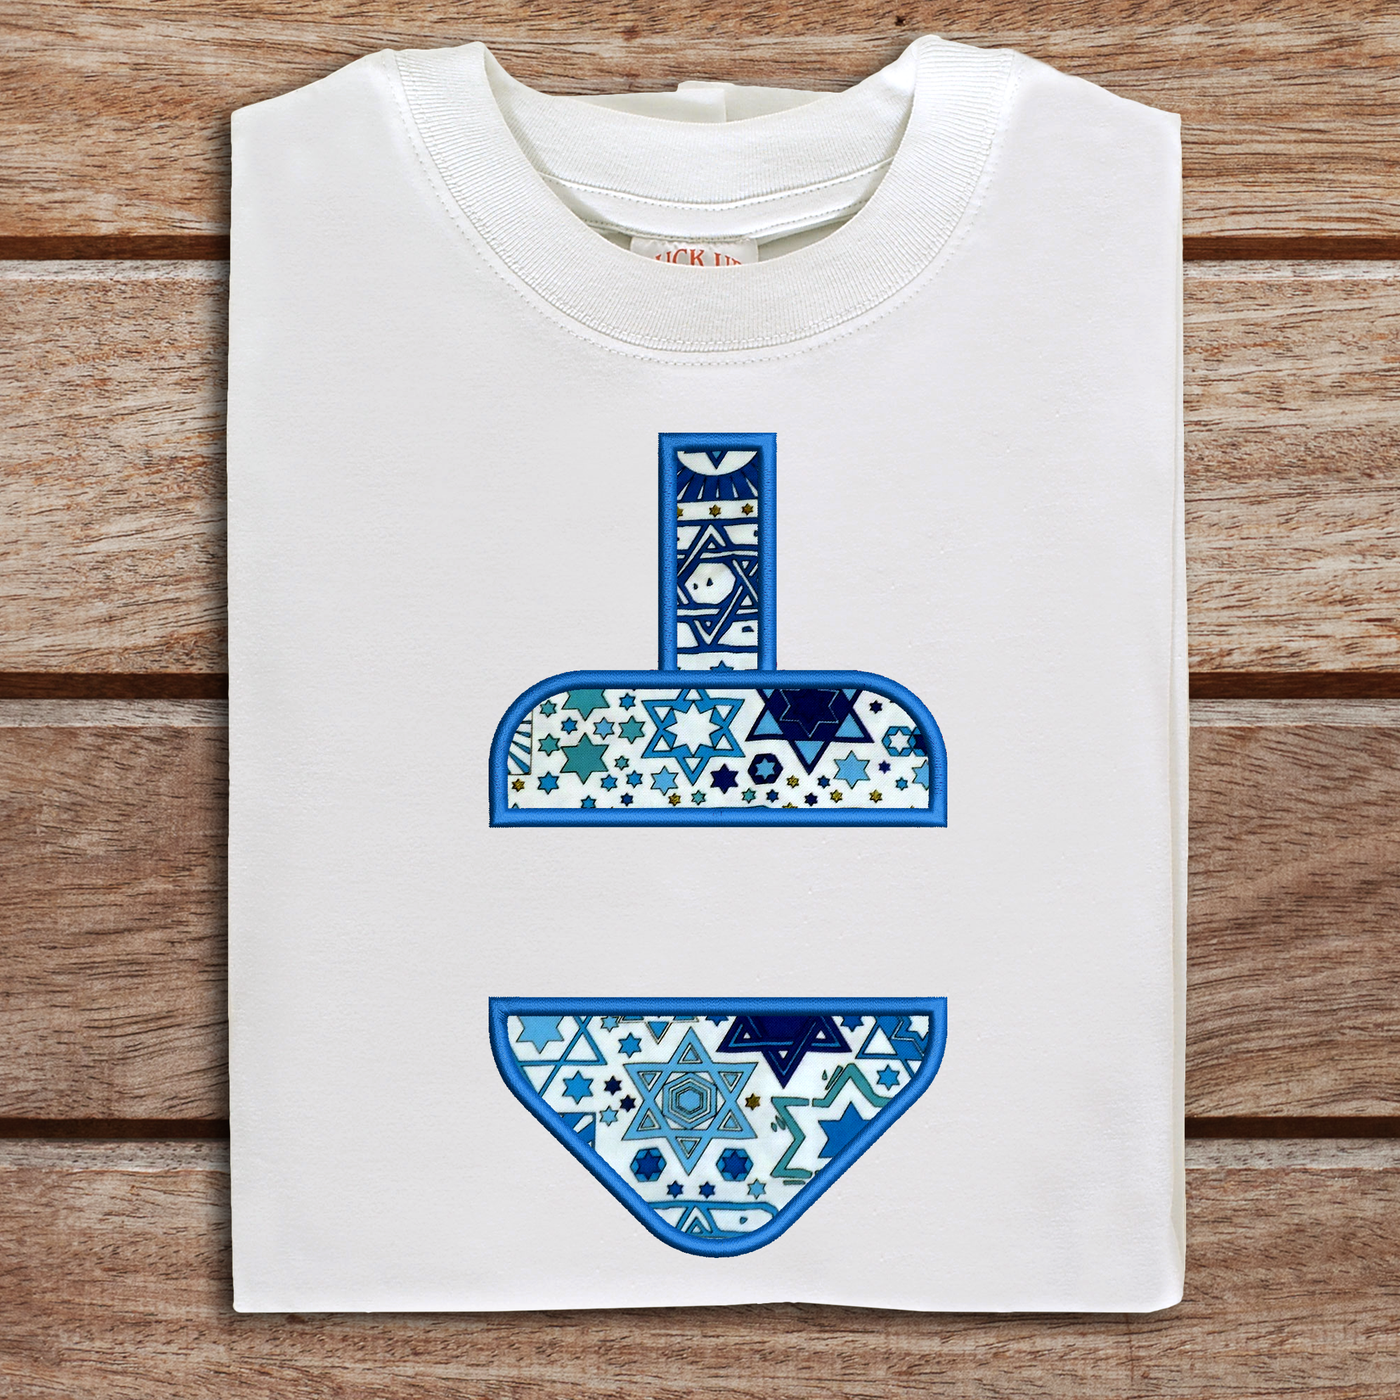 Folded tee with an applique dreidel design with a split in the middle.